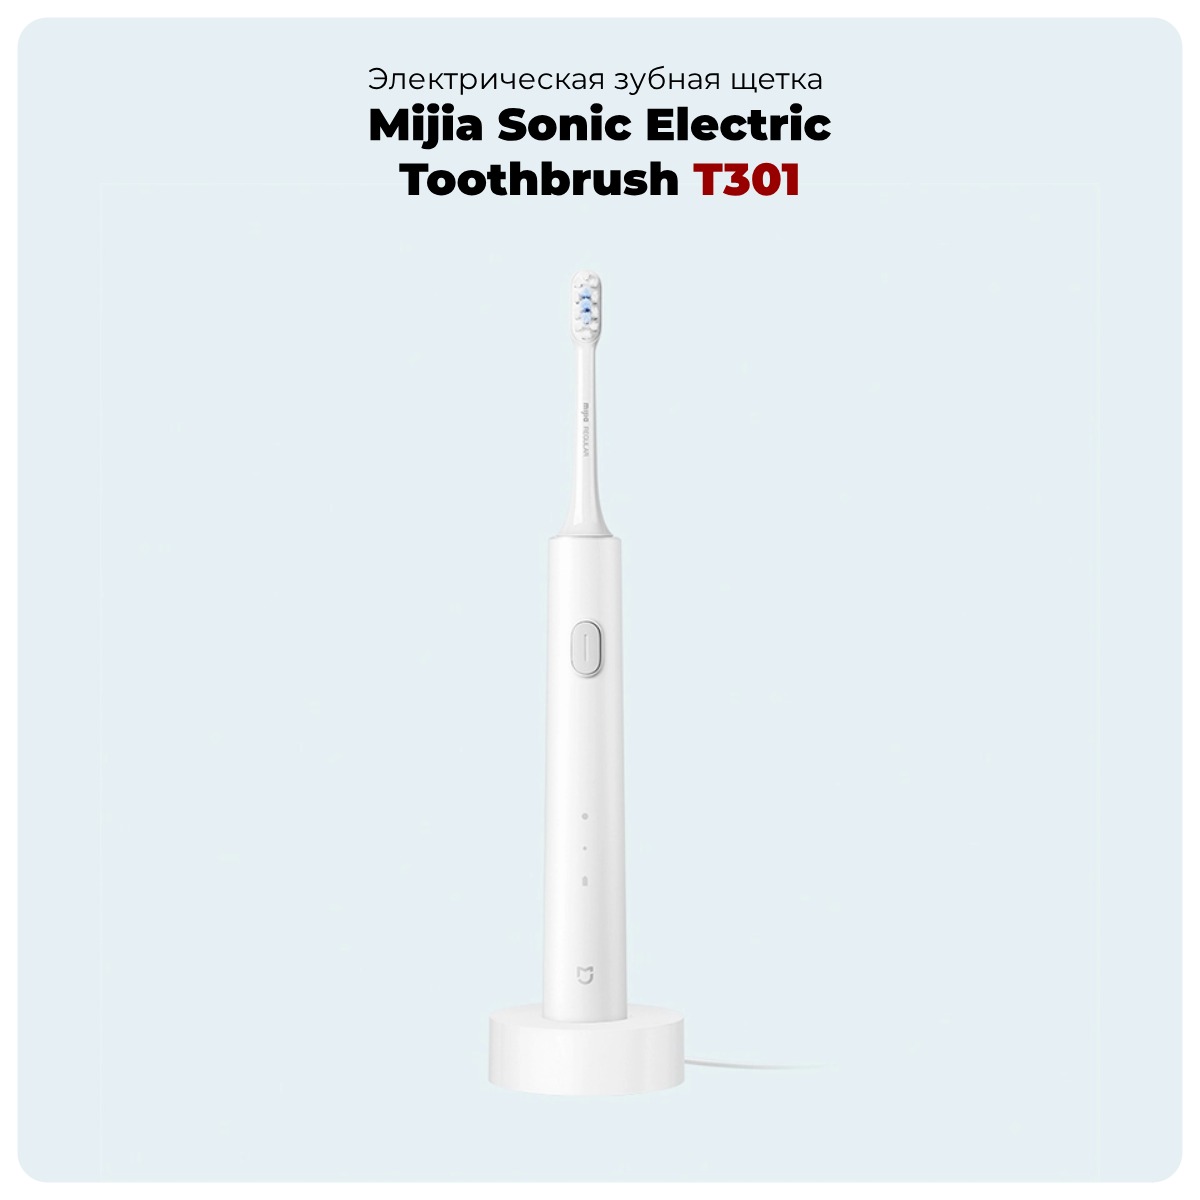 Mijia-Sonic-Electric-Toothbrush-T301-01